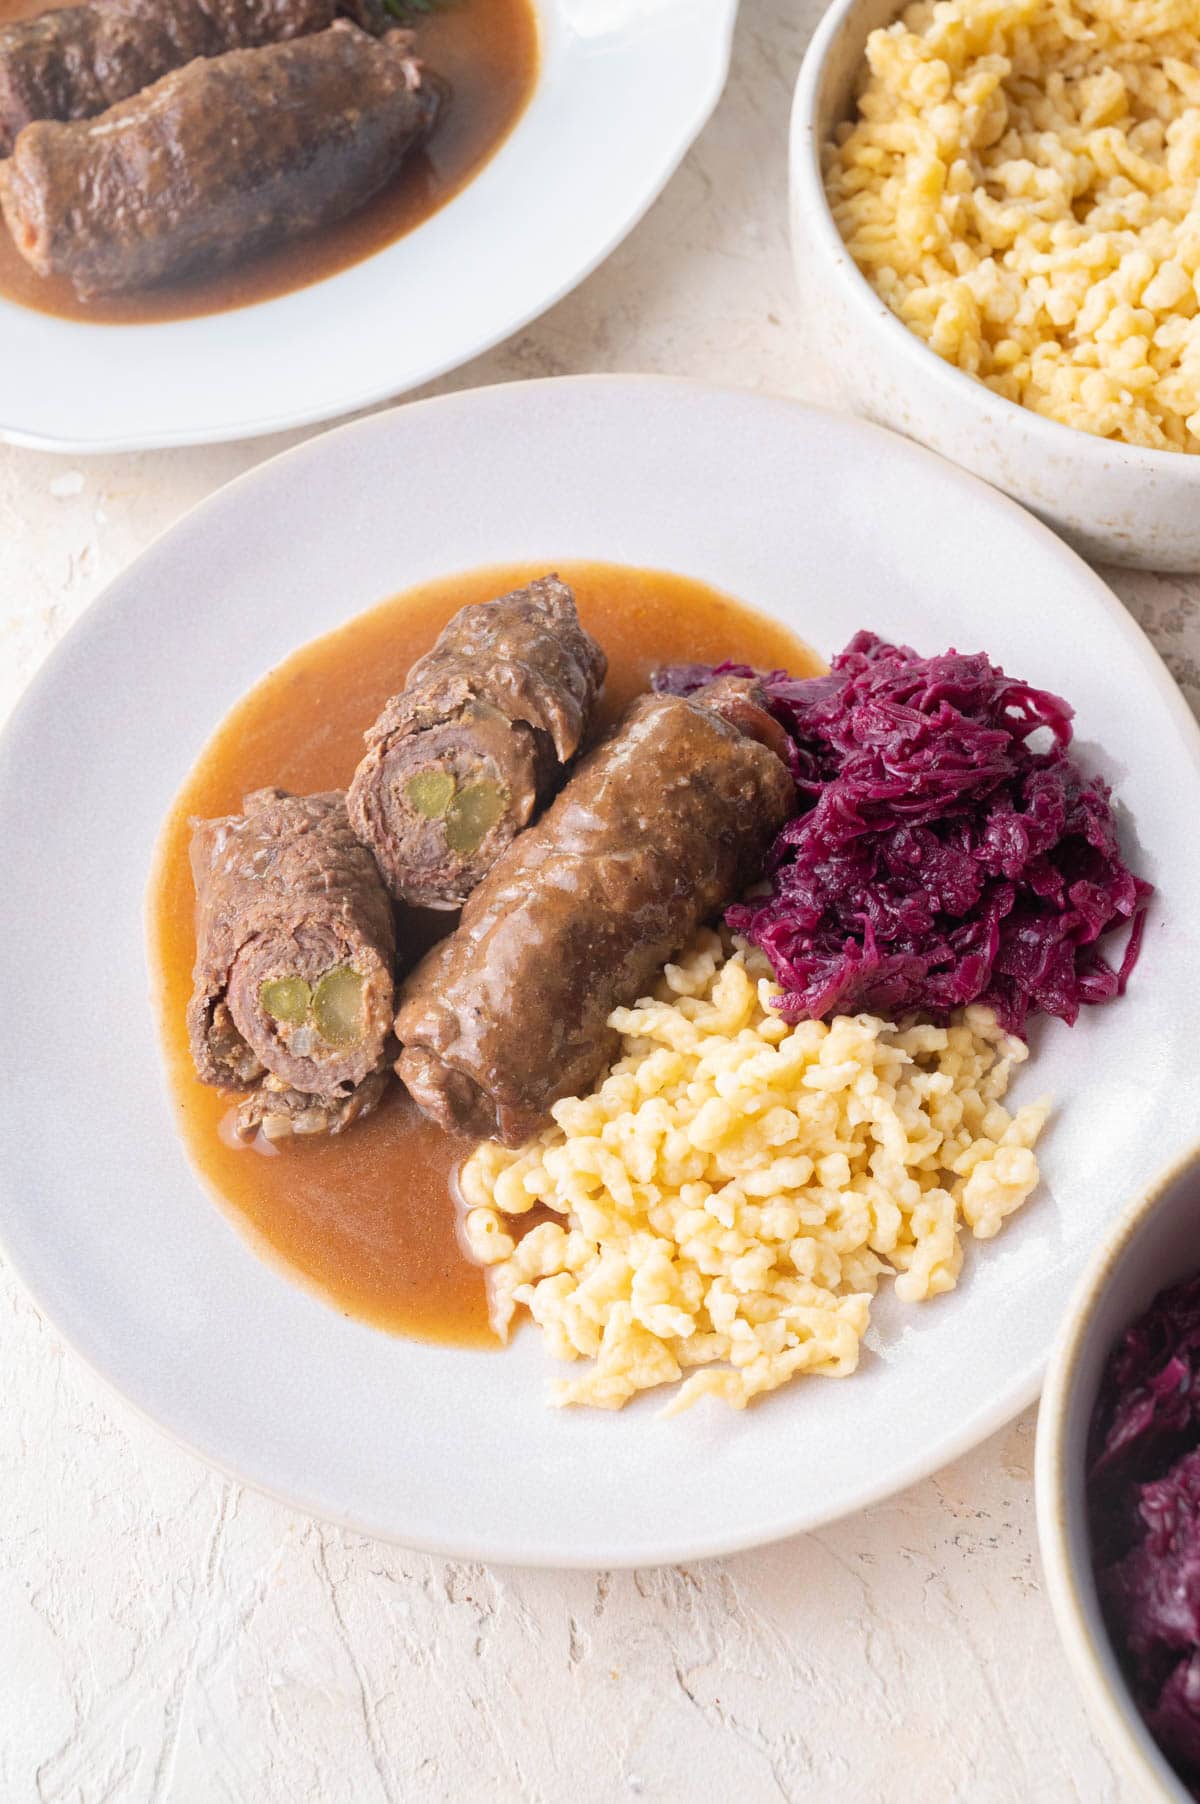 Rouladen with gravy, braised red cabbage, and Spätzle on a beige plate.